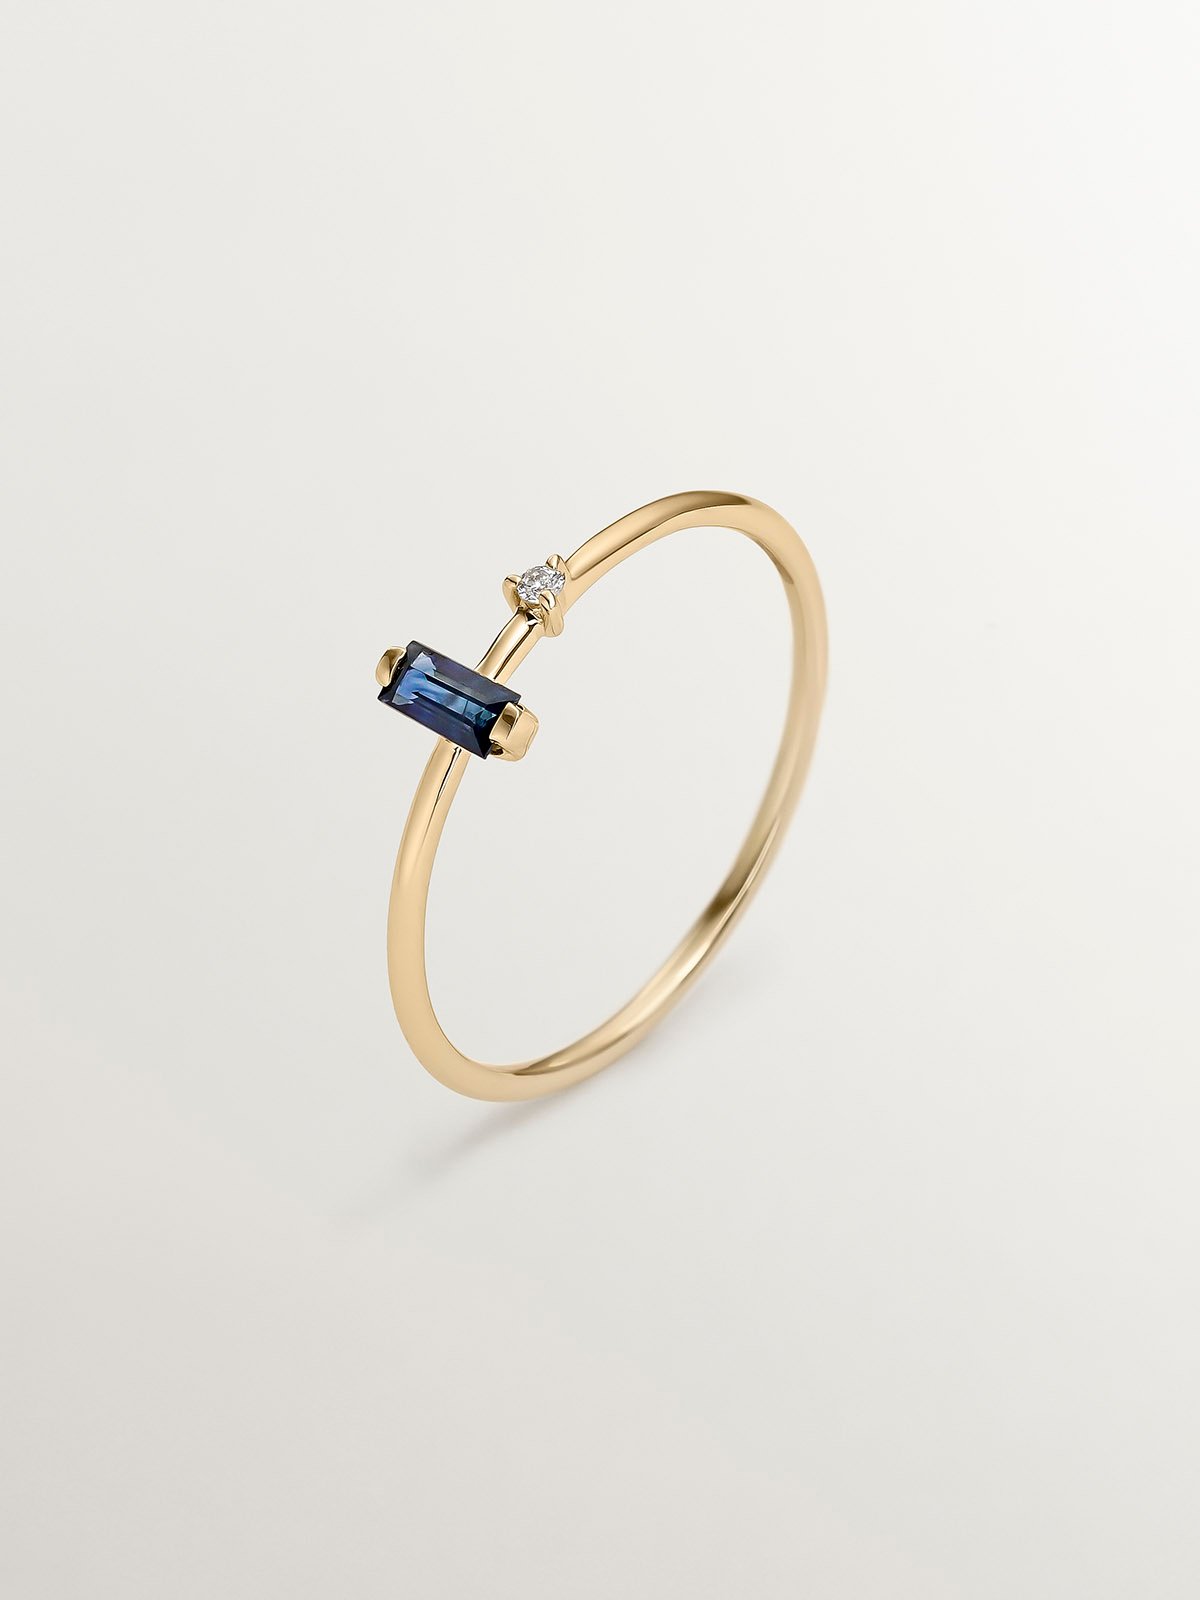 9K Yellow Gold Solitaire Ring with Blue Sapphire and Diamond